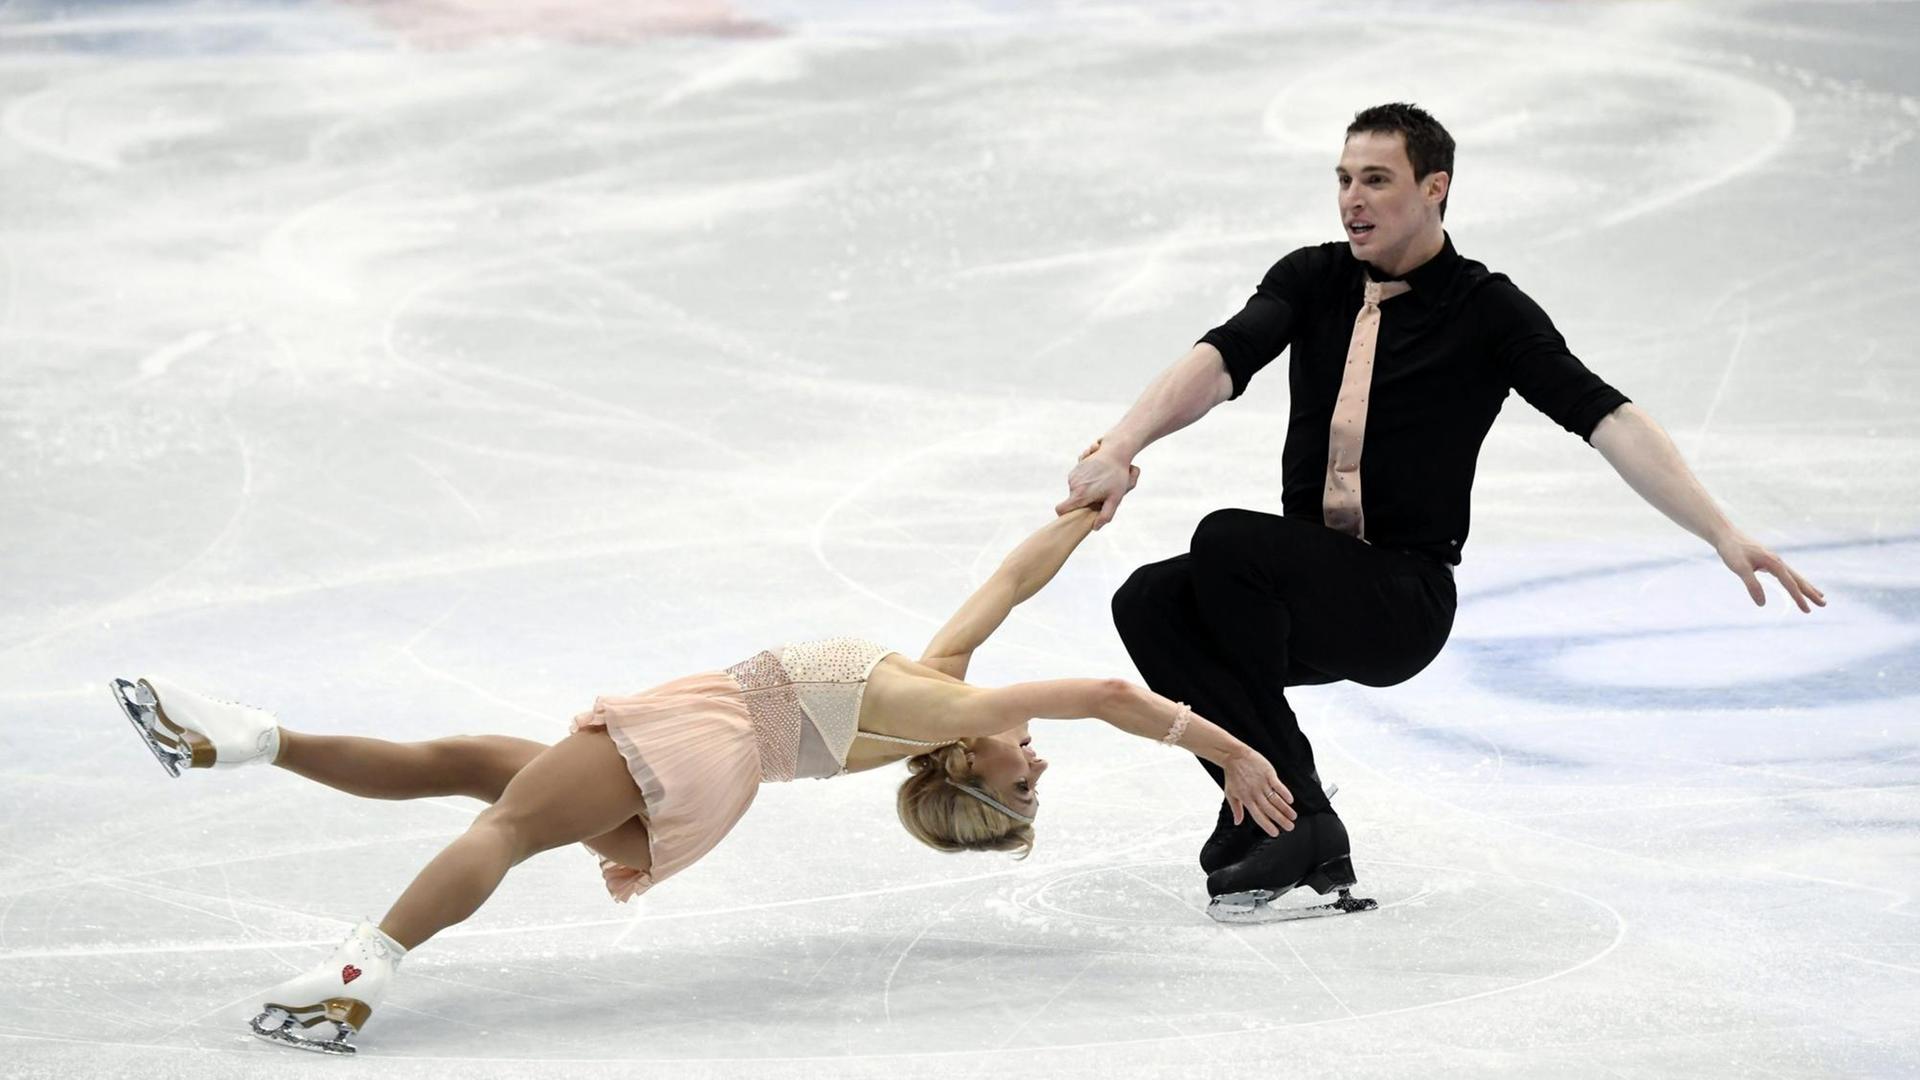 Aliona Savchenko and Bruno Massot of Germany perform their routine during the pairs' short program at the ISU World Figure Skating Championships in Helsinki, Finland, on March 29, 2017. LEHTIKUVA / MARKKU ULANDER - FINLAND OUT. NO THIRD PARTY SALES. |